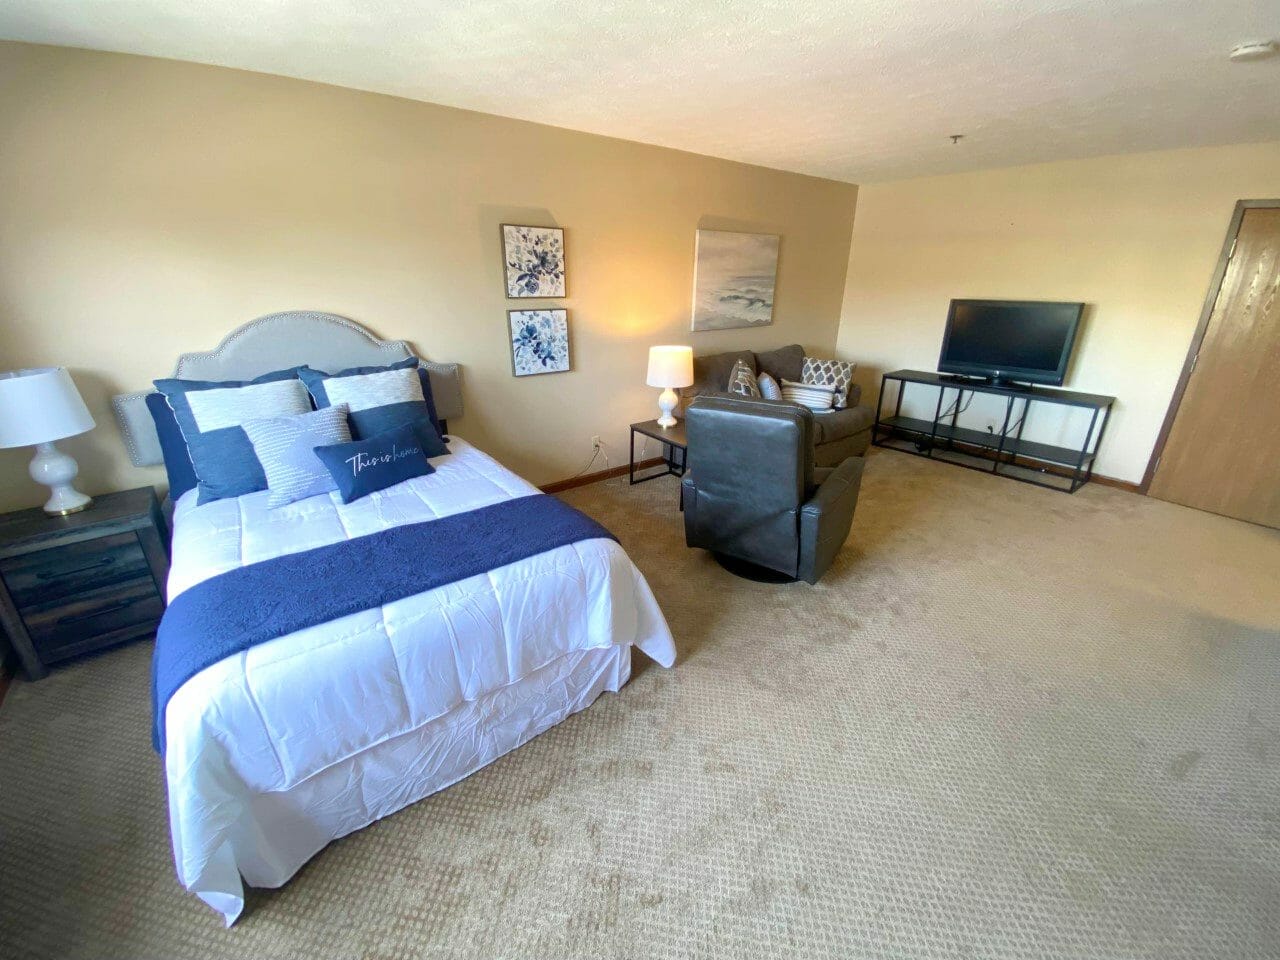 <span  class="uc_style_uc_tiles_grid_image_elementor_uc_items_attribute_title" style="color:#000000;">American Village respite care bedroom interior.</span>